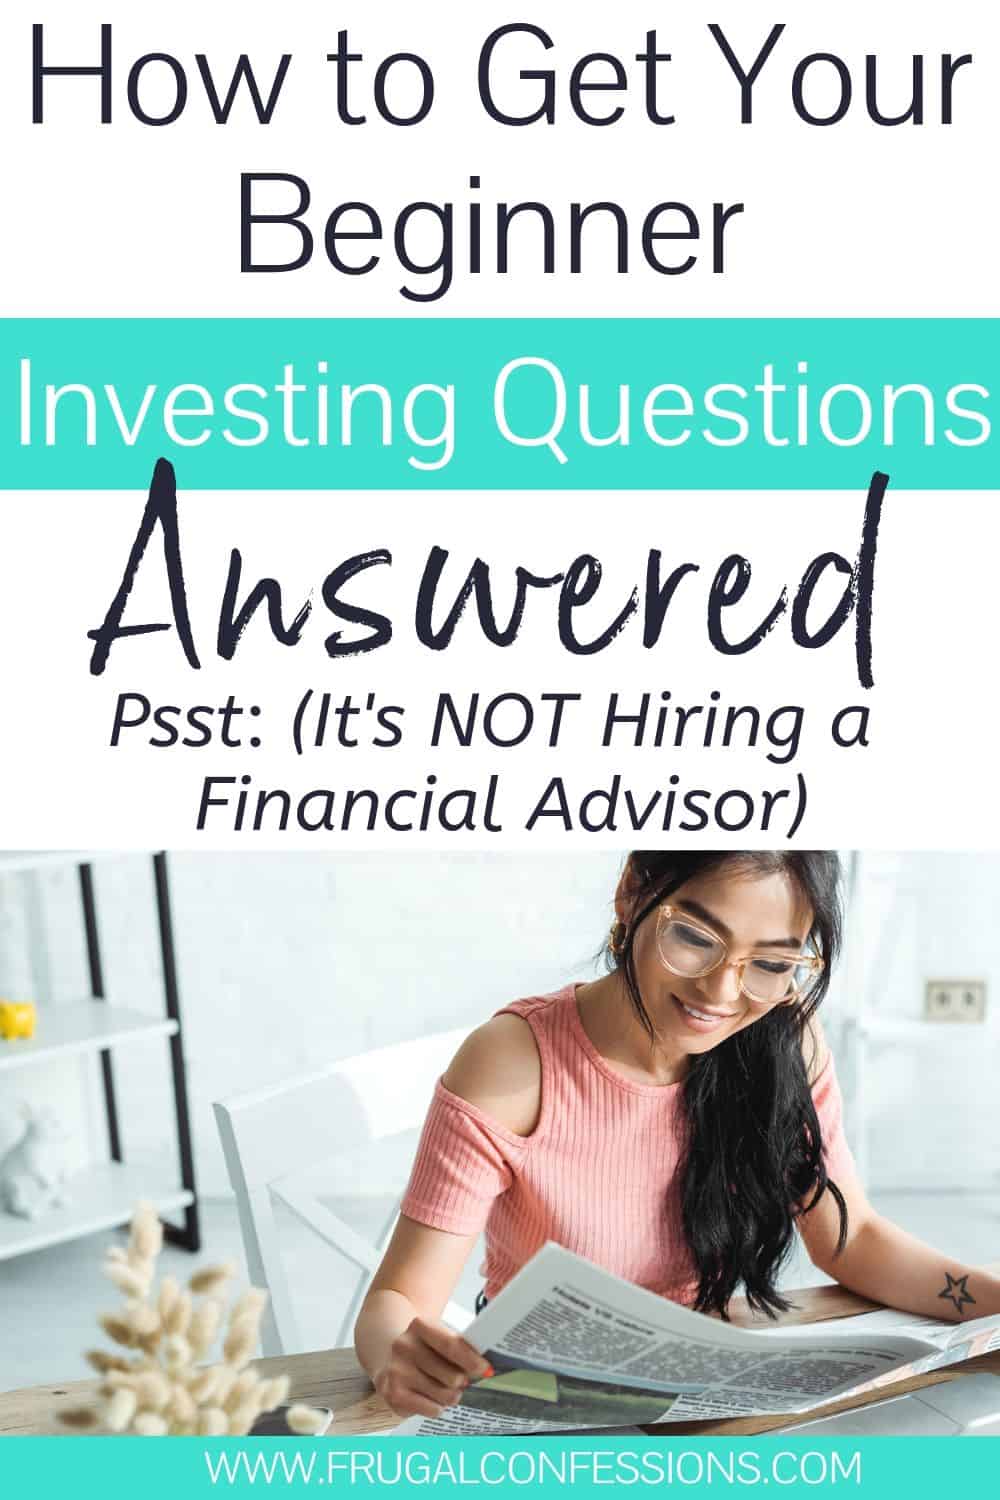 woman with glasses reading newspaper, text overlay "how to get your beginner investing questions answered"